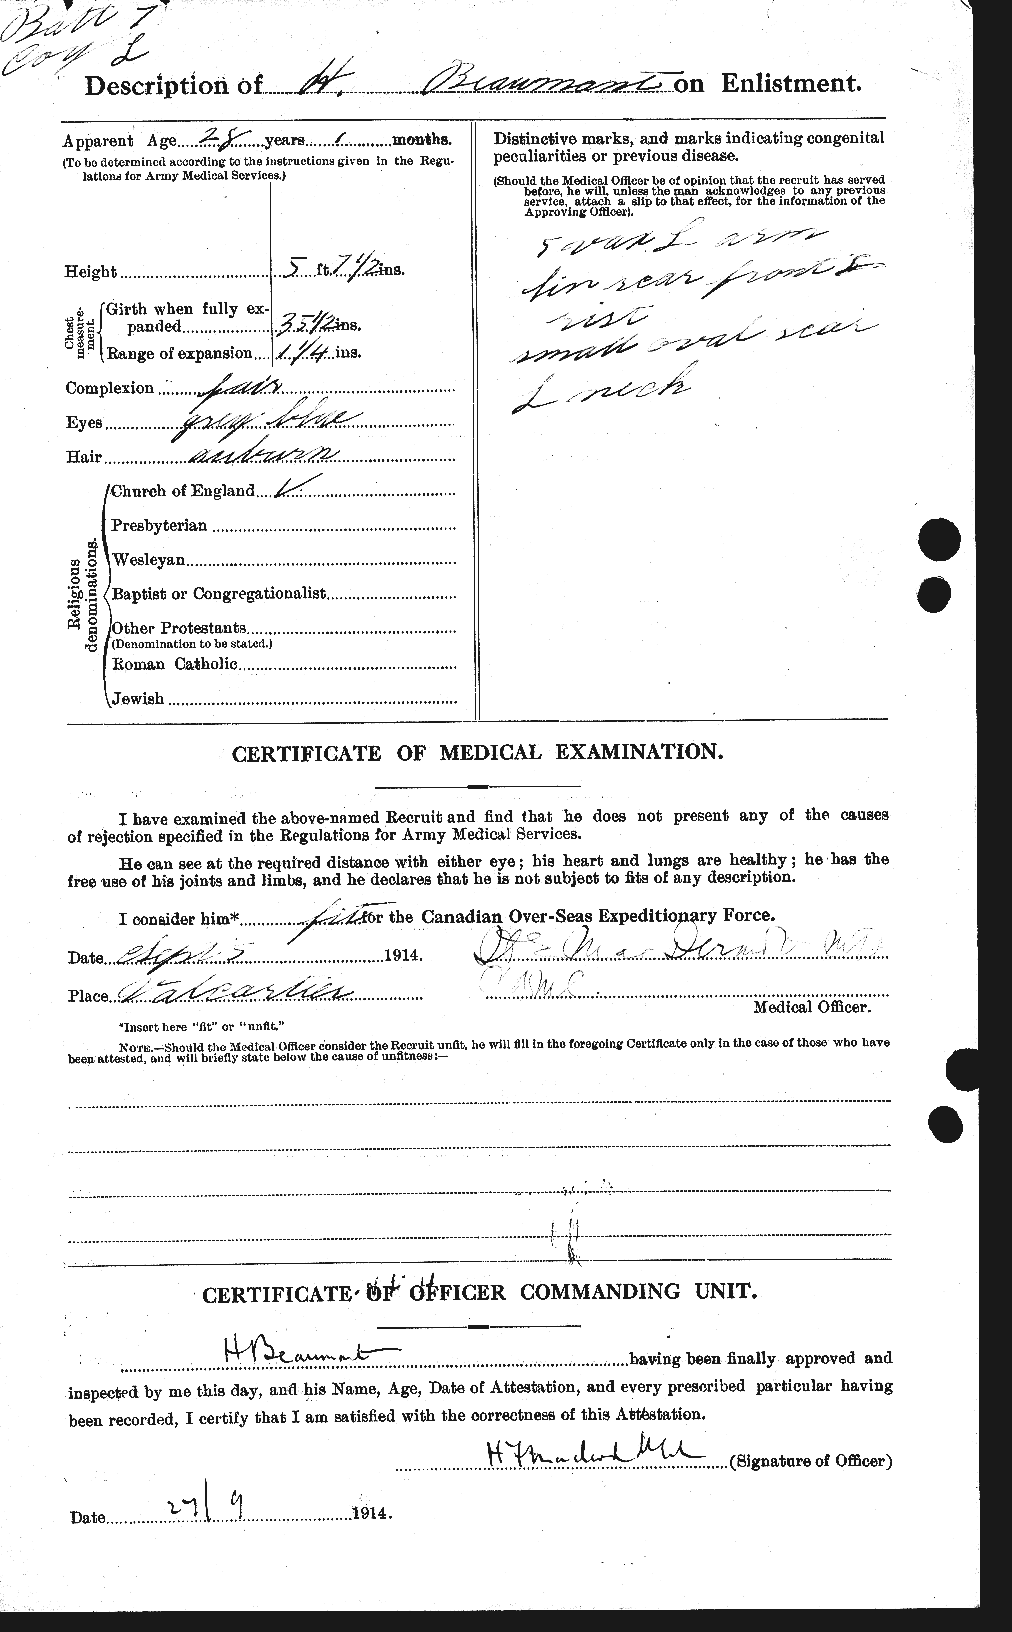 Personnel Records of the First World War - CEF 231673b